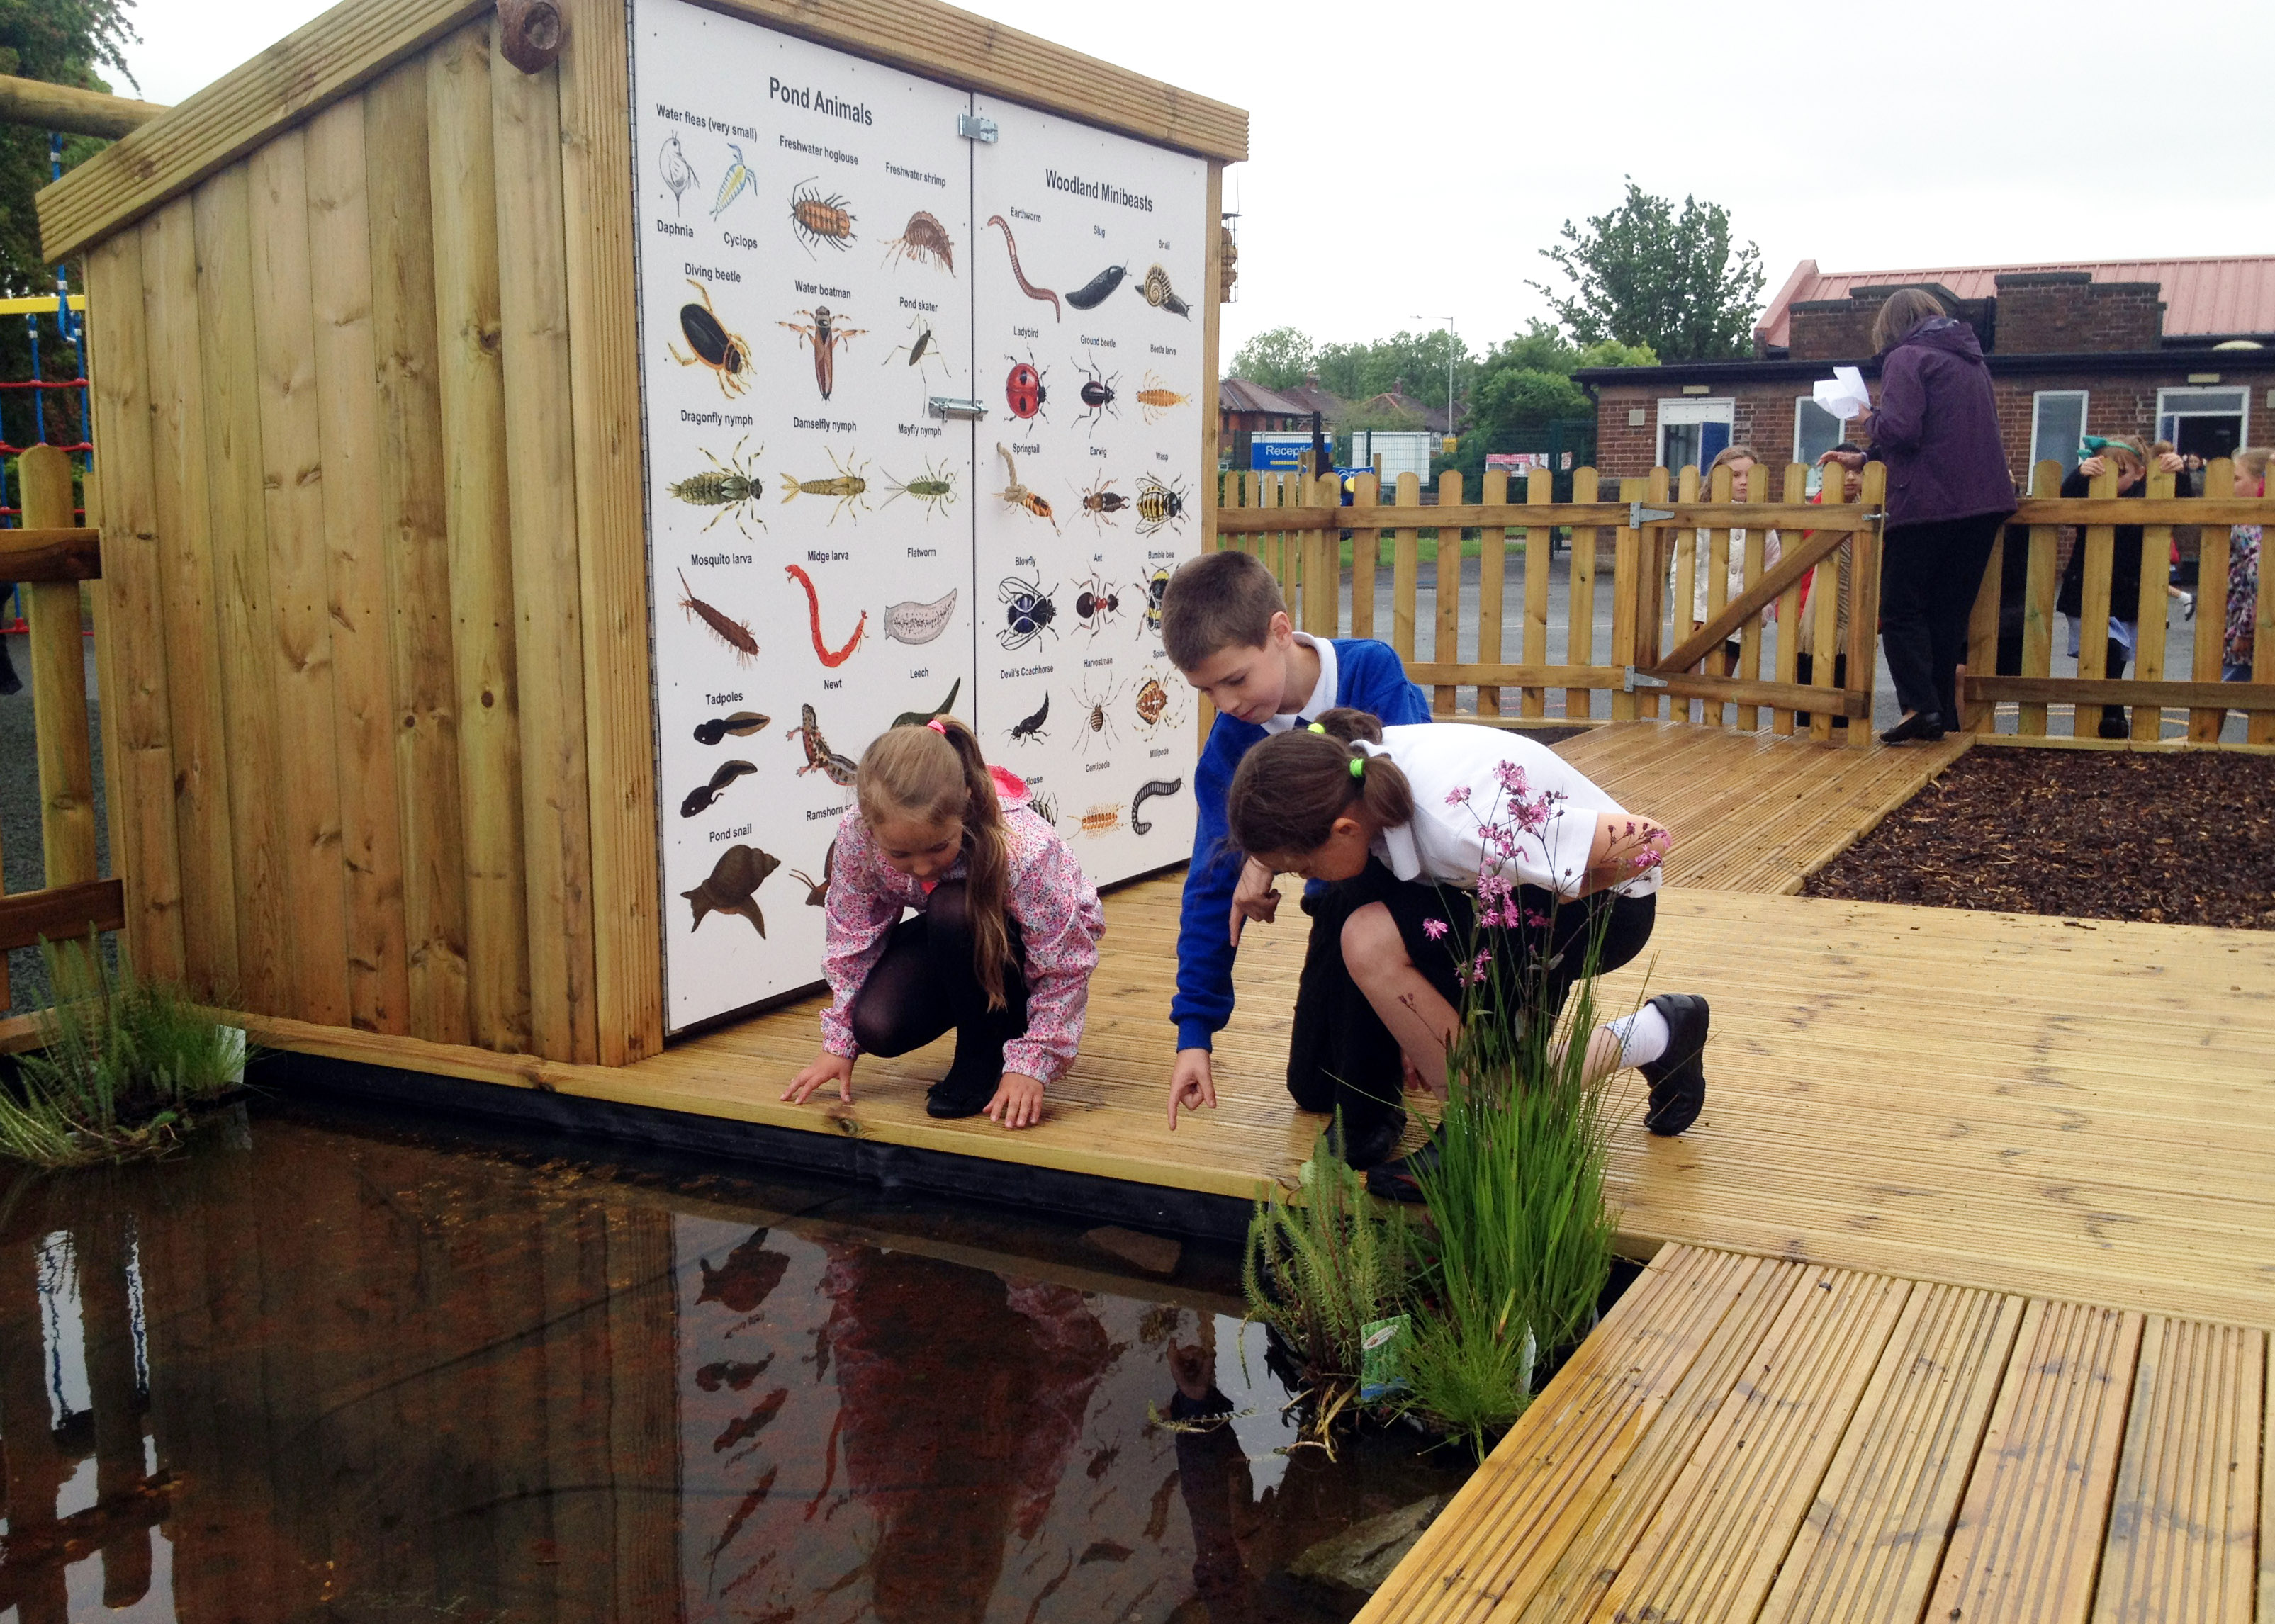 3 children interacting with the pond that has been constructed within our wildlife area product.